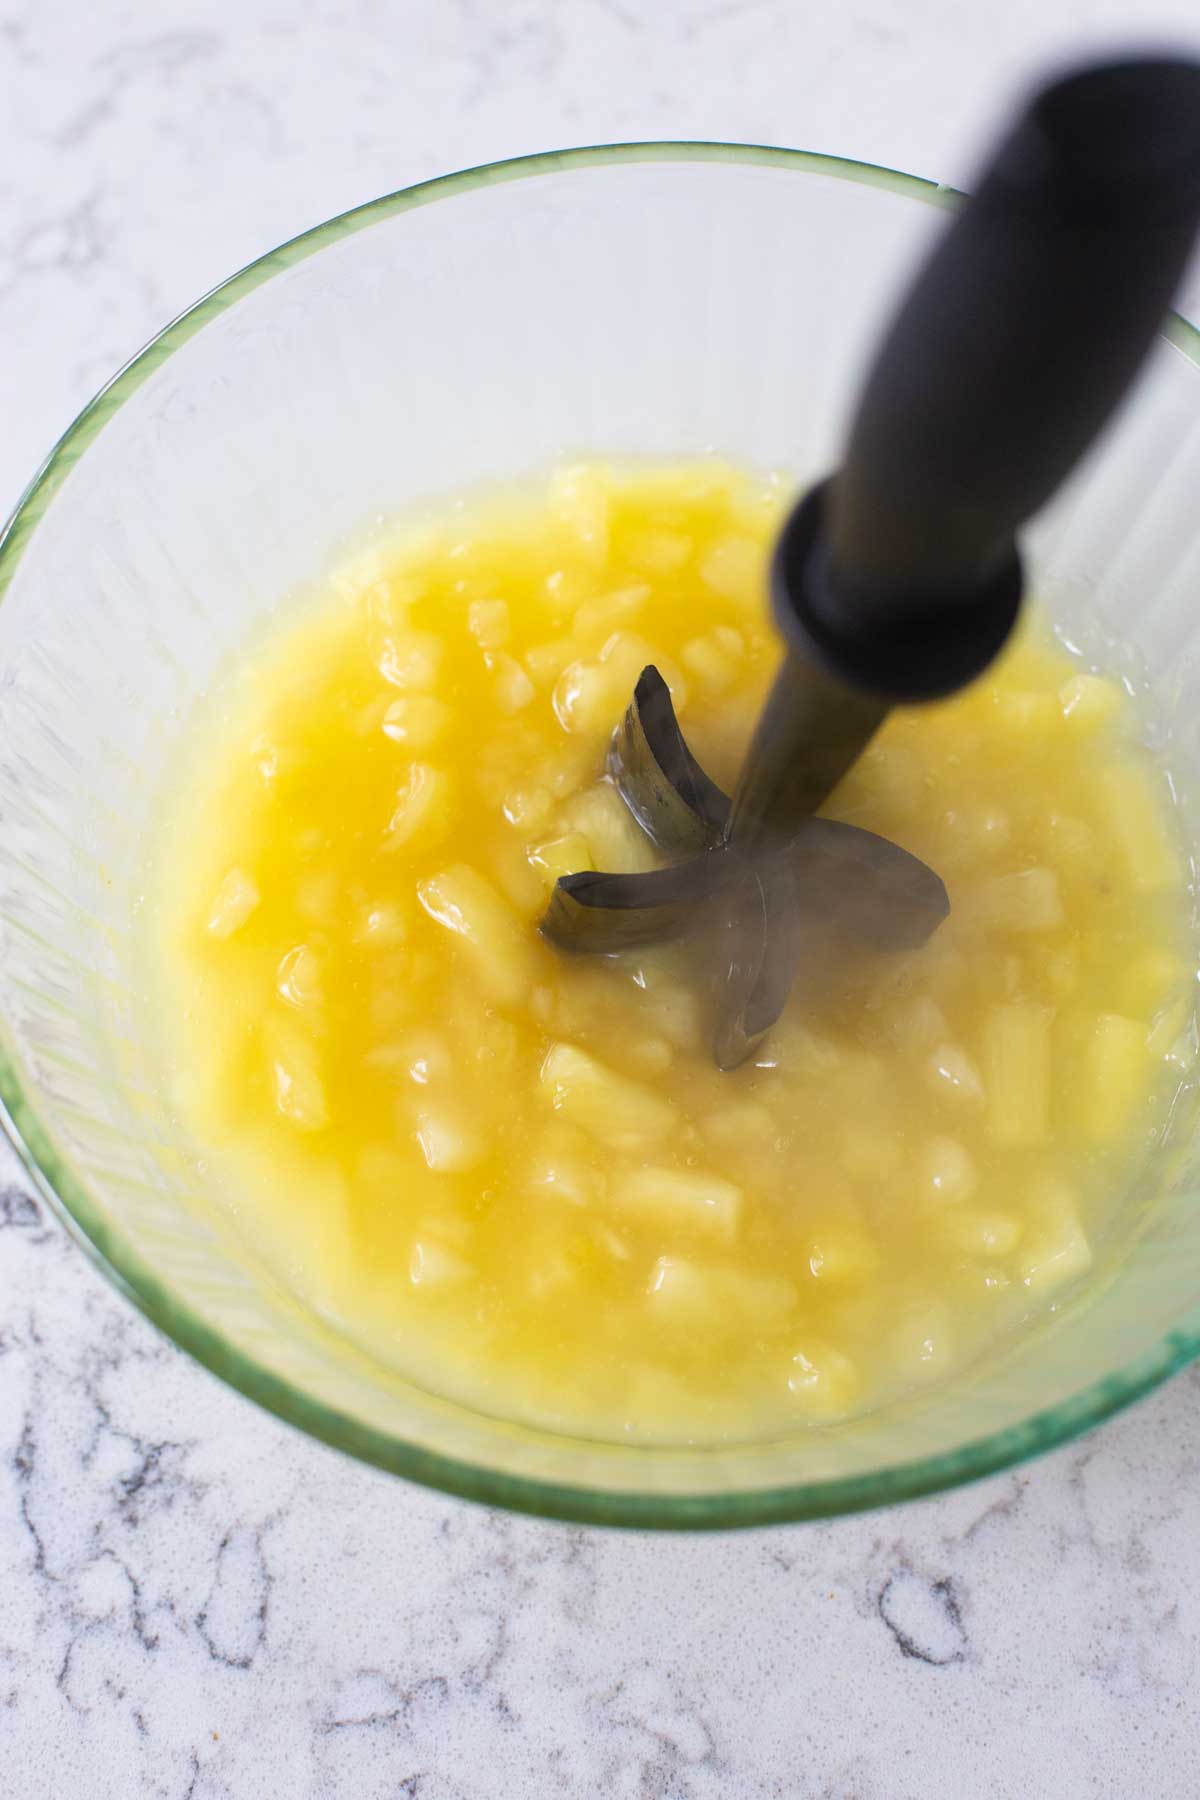 A crushing tool is used to break up the pineapple chunks.